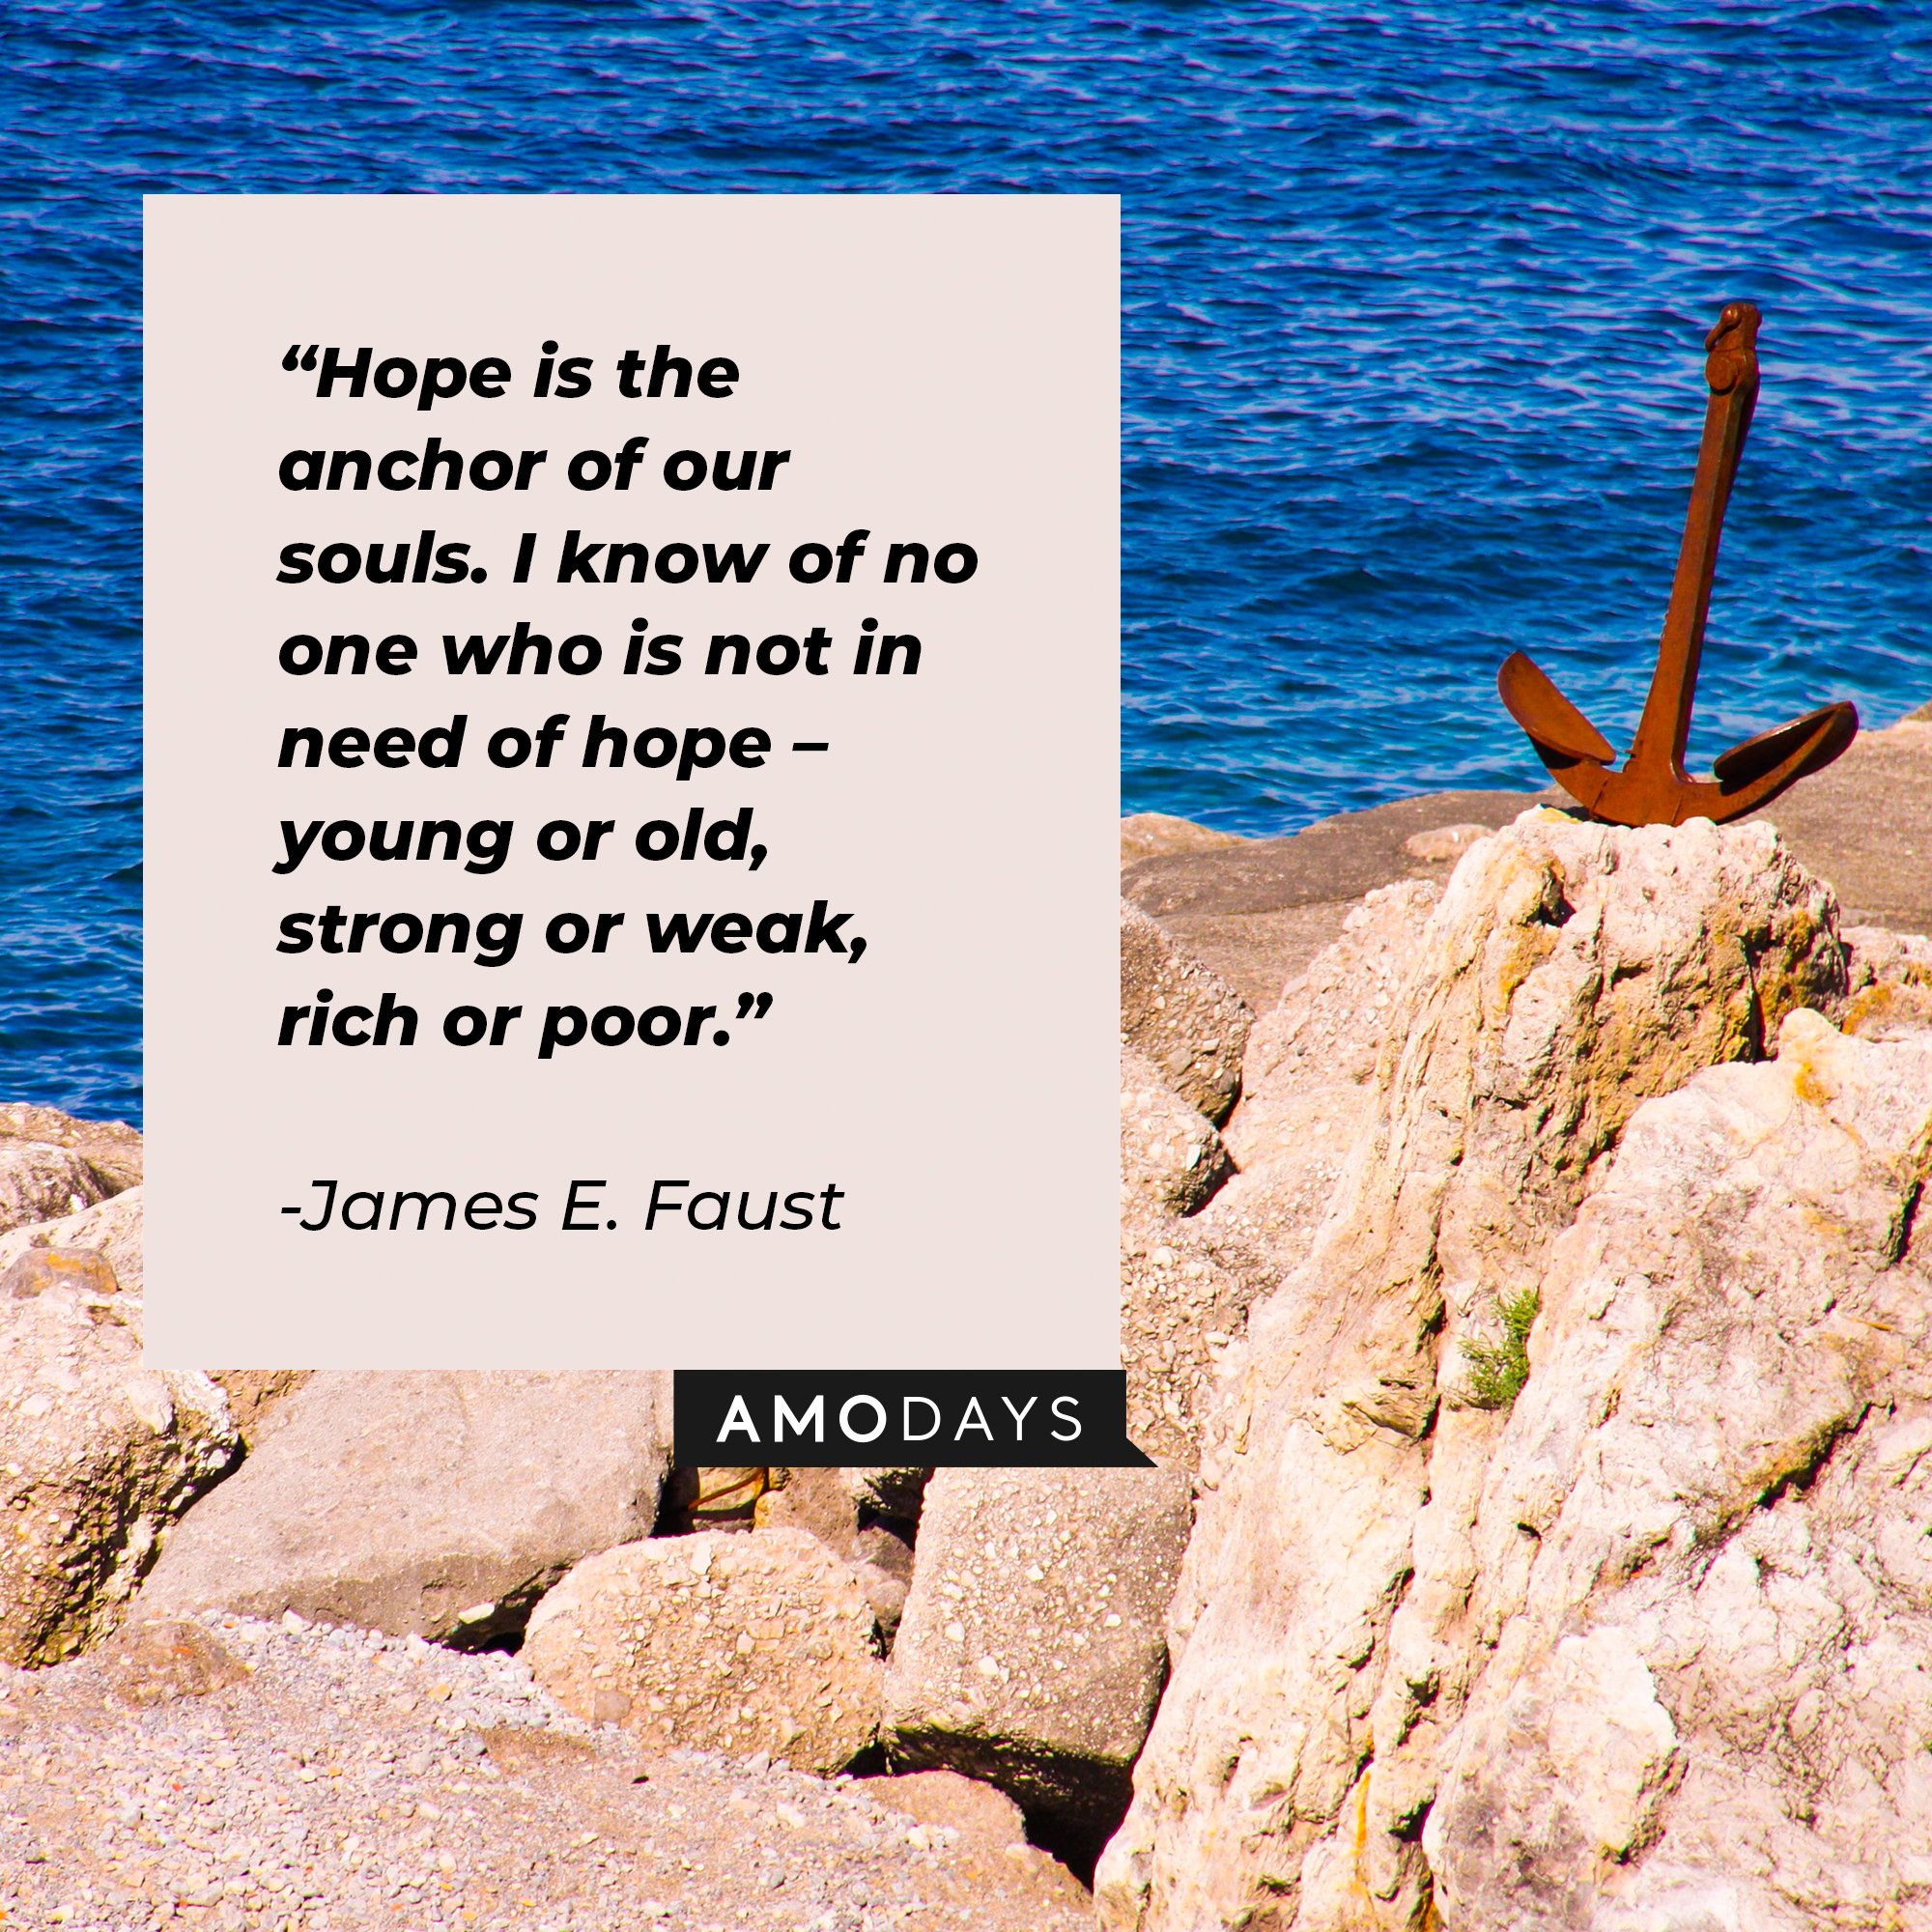 James E. Faust's quote: "Hope is the anchor of our souls. I know of no one who is not in need of hope – young or old, strong or weak, rich or poor." | Image: AmoDays